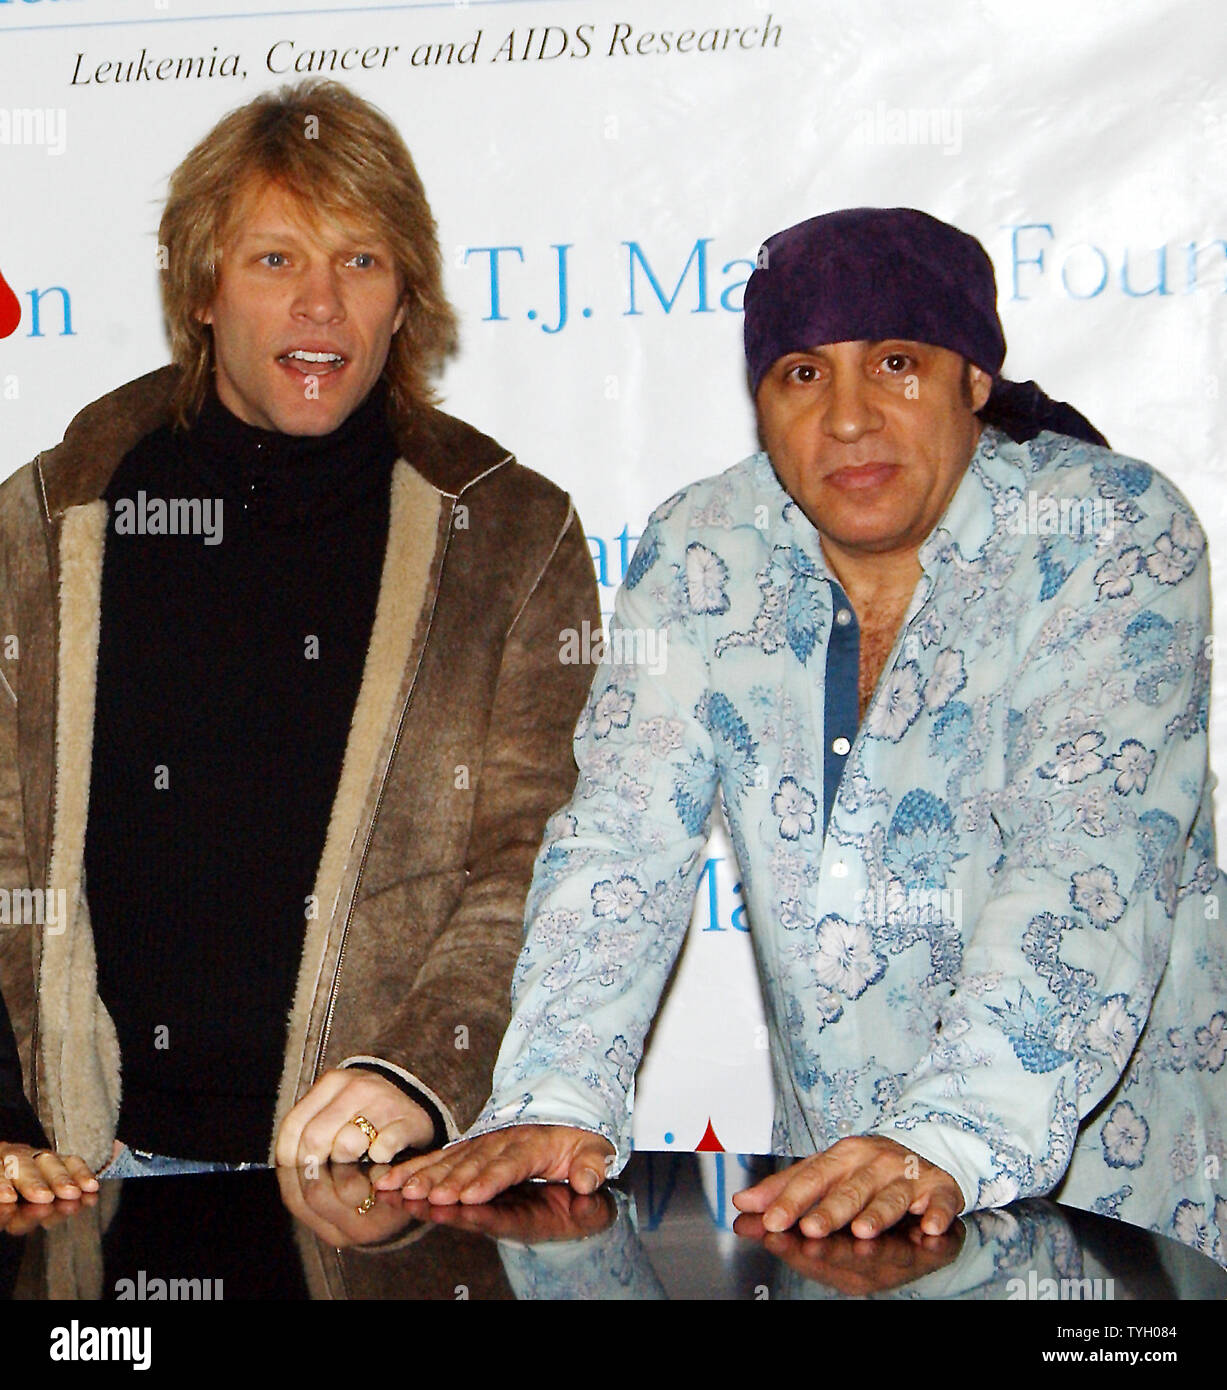 Jon Bon Jovi and Steven Van Zandt (left to right) pose after the 2/8/05 New York press conference held by the T.J.Martell Foundation which funds innovative medical research into the treatment and cure of leukemia, cancer and AIDS, to announce plans for the organizations 30th anniversary gala.  (UPI Photo/Ezio Petersen) Stock Photo